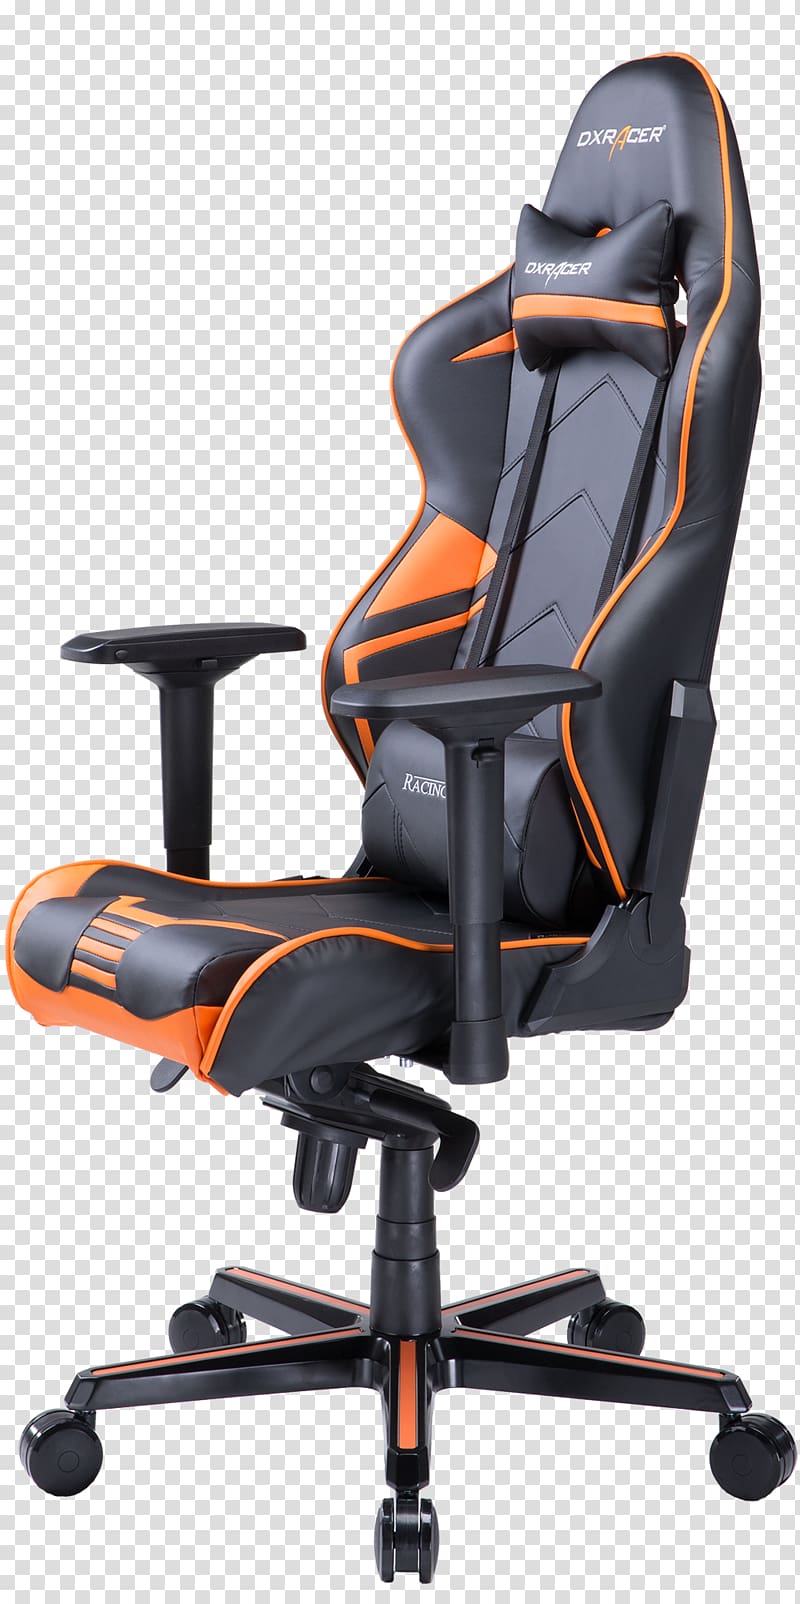 Office & Desk Chairs Gaming chair Furniture DXRacer, chair transparent background PNG clipart